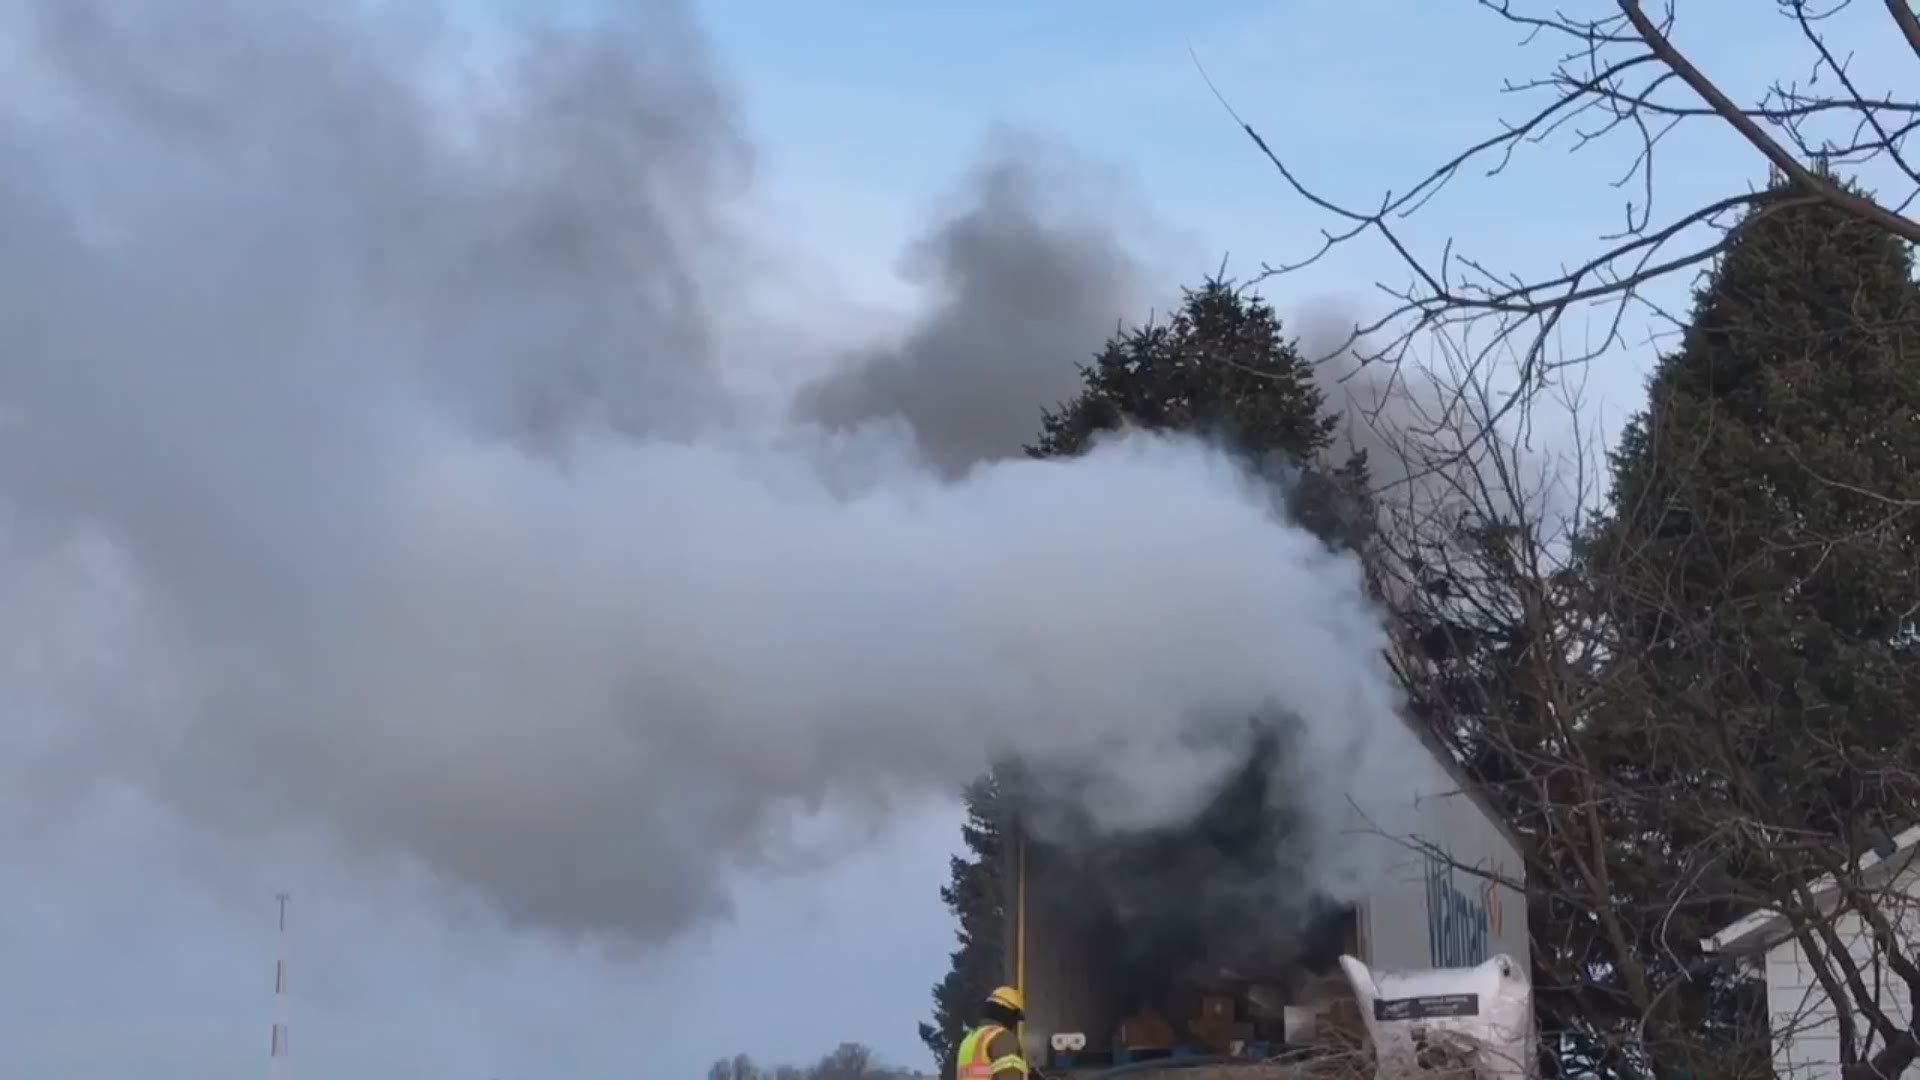 Semi truck narrowly misses home before crashing and bursting into flames Tuesday morning